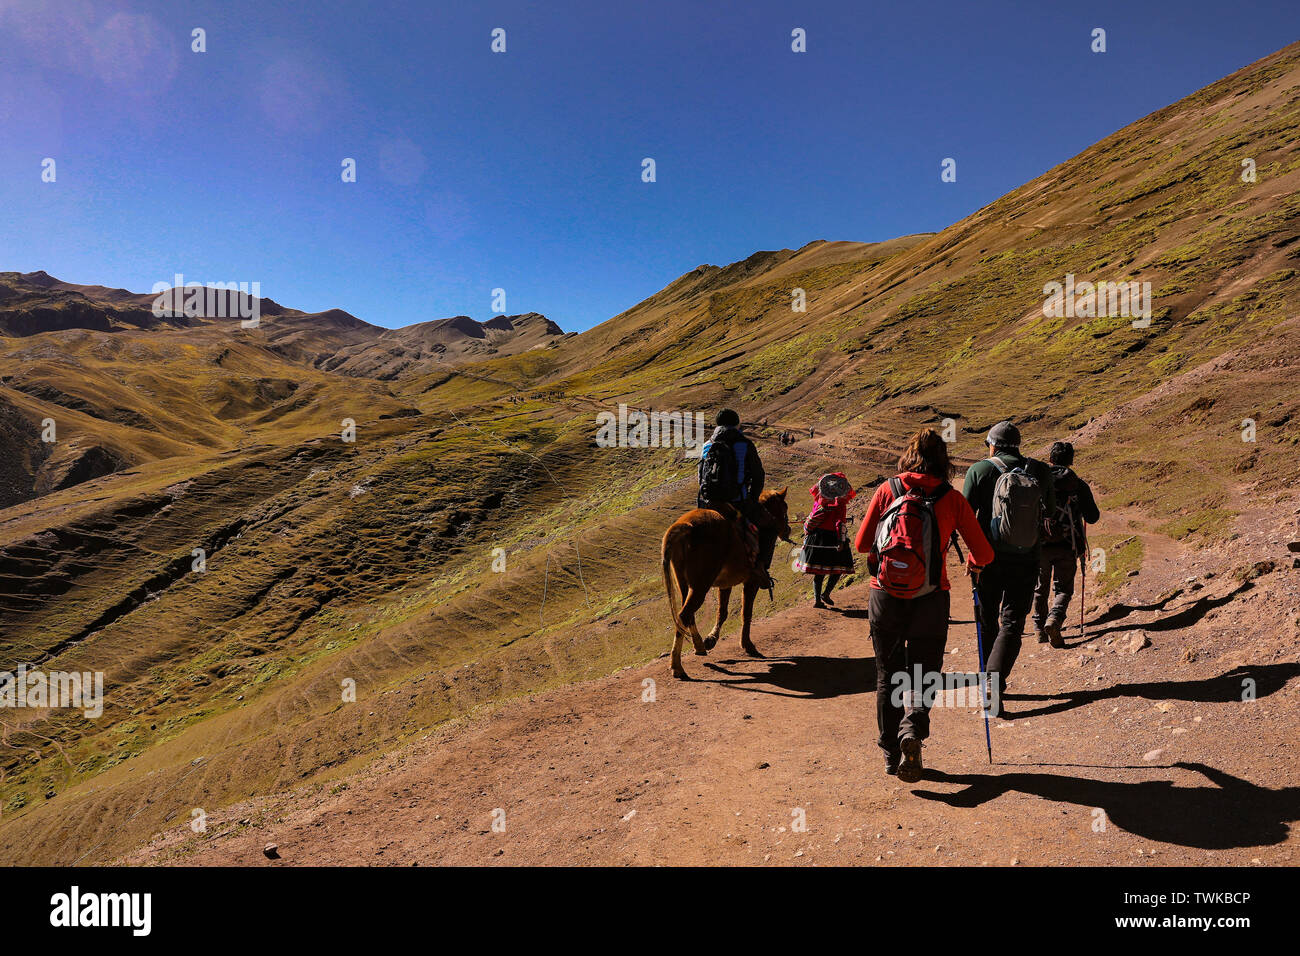 02 May 2019, Peru, Cusco: Toursites on the ascent to the Rainbow Montain. The Vinicunca, or the Rainbowmontain with an altitude of 5200 meters above zero, is located in the south of Peru and is increasingly developing into a tourist hotspot for day trippers from nearby Cusco. Only a few years ago the mountain was covered with snow and ice. Now the seven colours attract tourists from all over the world like a magnet. The Vinicunca is in the process of losing the rank in the tourist attraction Machu Picchu. The best view of Vinicunca is from the opposite mountain at 5340 metres above sea level. Stock Photo